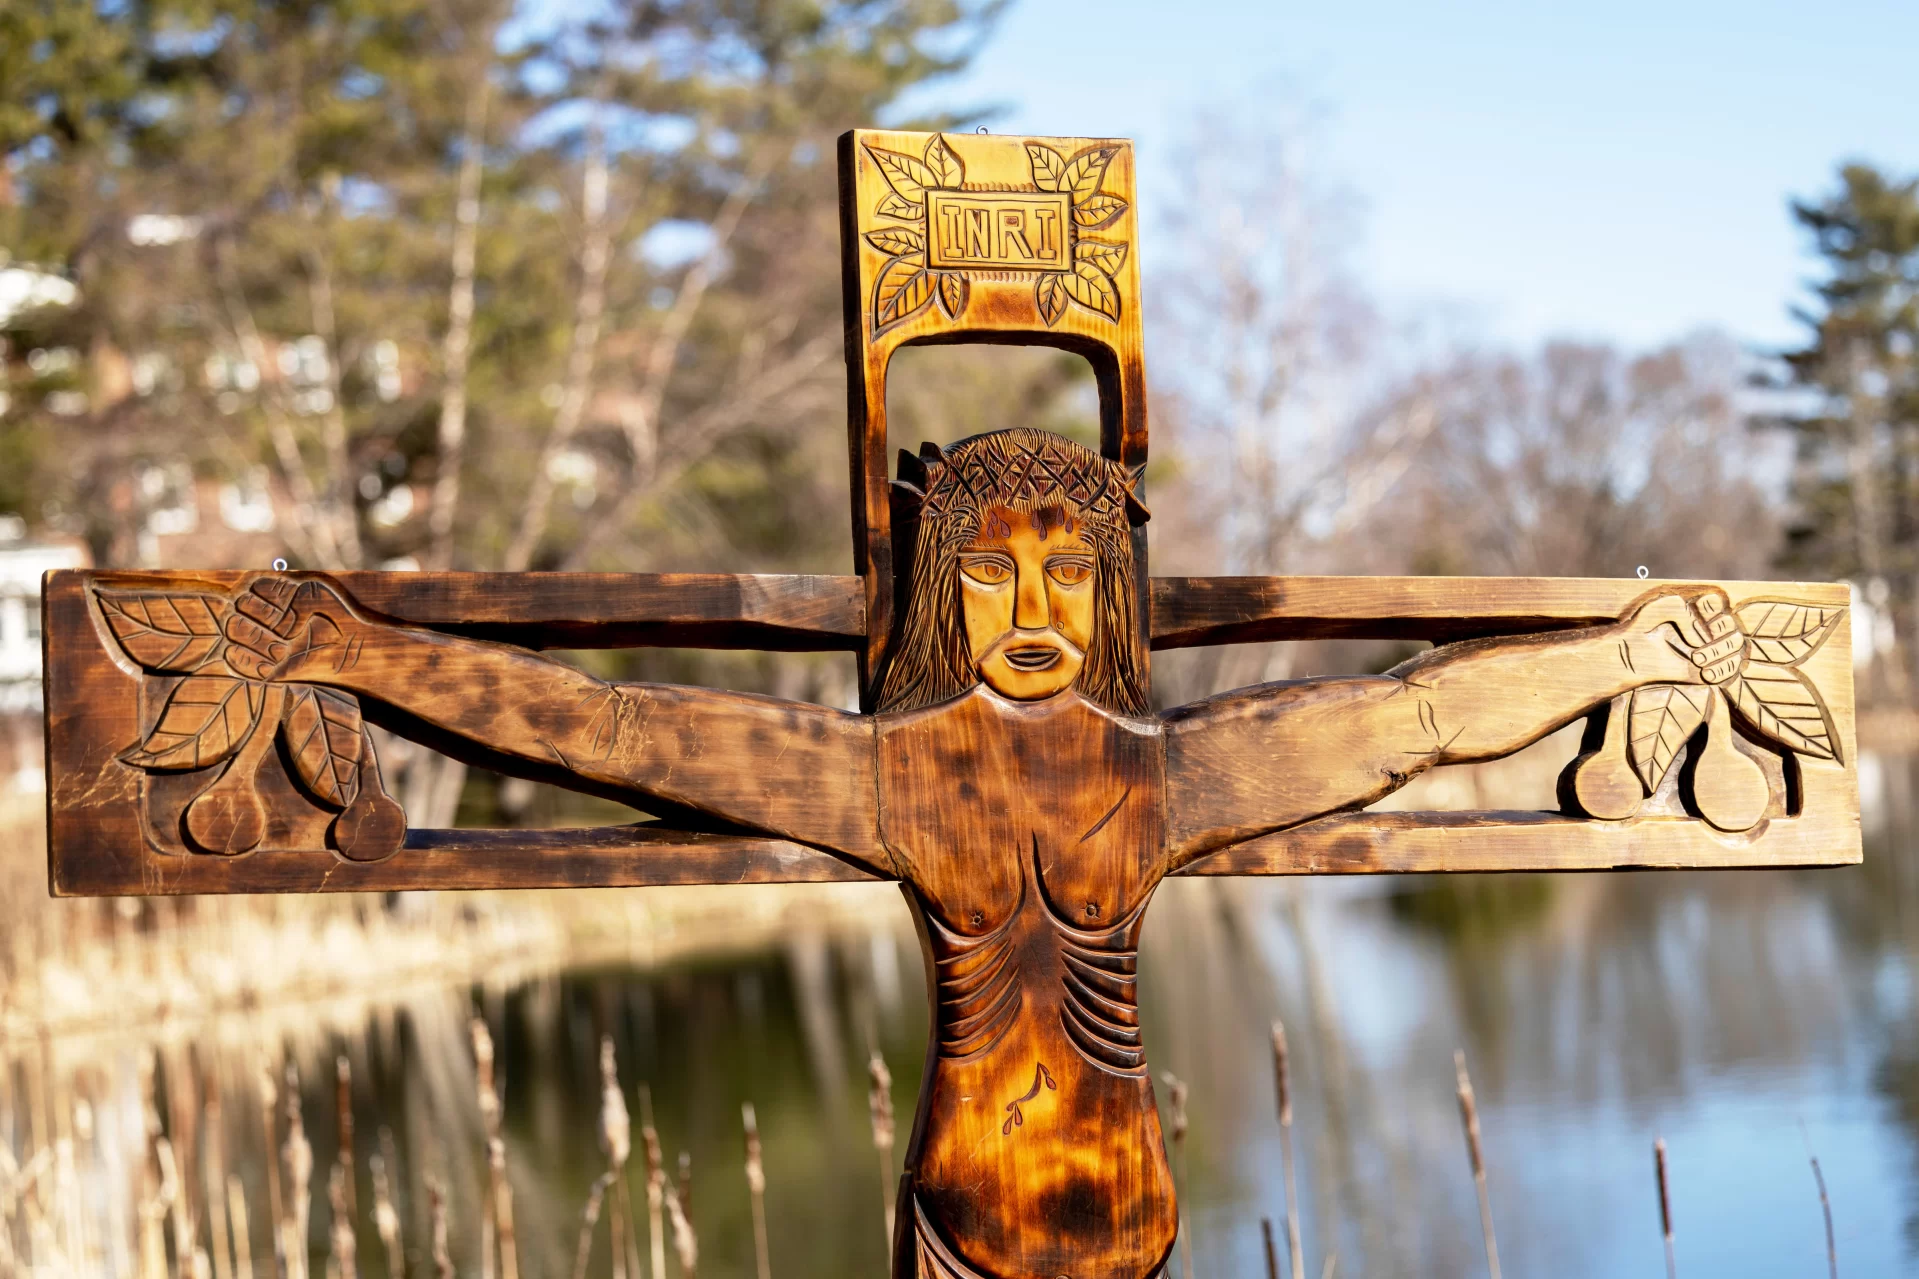 What: Wood sculpture of Christ on the cross
Created by: The Brazilian sculptor Ziltamir Sebastião Soares de Maria (1947–2013) (aka "Manxa") was in residence at Bates in spring 1971 under a program called "Maine's Partners of the Alliance," a culture exchange program then part of USAID and now a private entity called "Partners of the Americas."
Name: The back of the sculpture, which is, has what appears to be its Portuguese title, Auto Retrato Do Meu Povo, (“OWtoh hrayTRAtoh doh MEI-oh POvoh”, roll the “r”s in retrato) or "Self Portrait of My People"
Size: 7 feet tall and 5 feet 8 inches wide
When Created: The back has written March 5, 1971, with a dollar figure (a price estimate for a potential sale?) also written ($800).
Inscription at Top: “INRI,” Latin for “Jesus, King of the Jews,” commonly seen on crucifixes.
Fruit: The fruit that Jesus grasps could reflect Manxa’s style of indiginous Brazilian art. He “carved in wood... sometimes with spaces in copper inlays, characters, crafts and all tropical flora of Rio Grande do Norte,” his home state in Brazil.